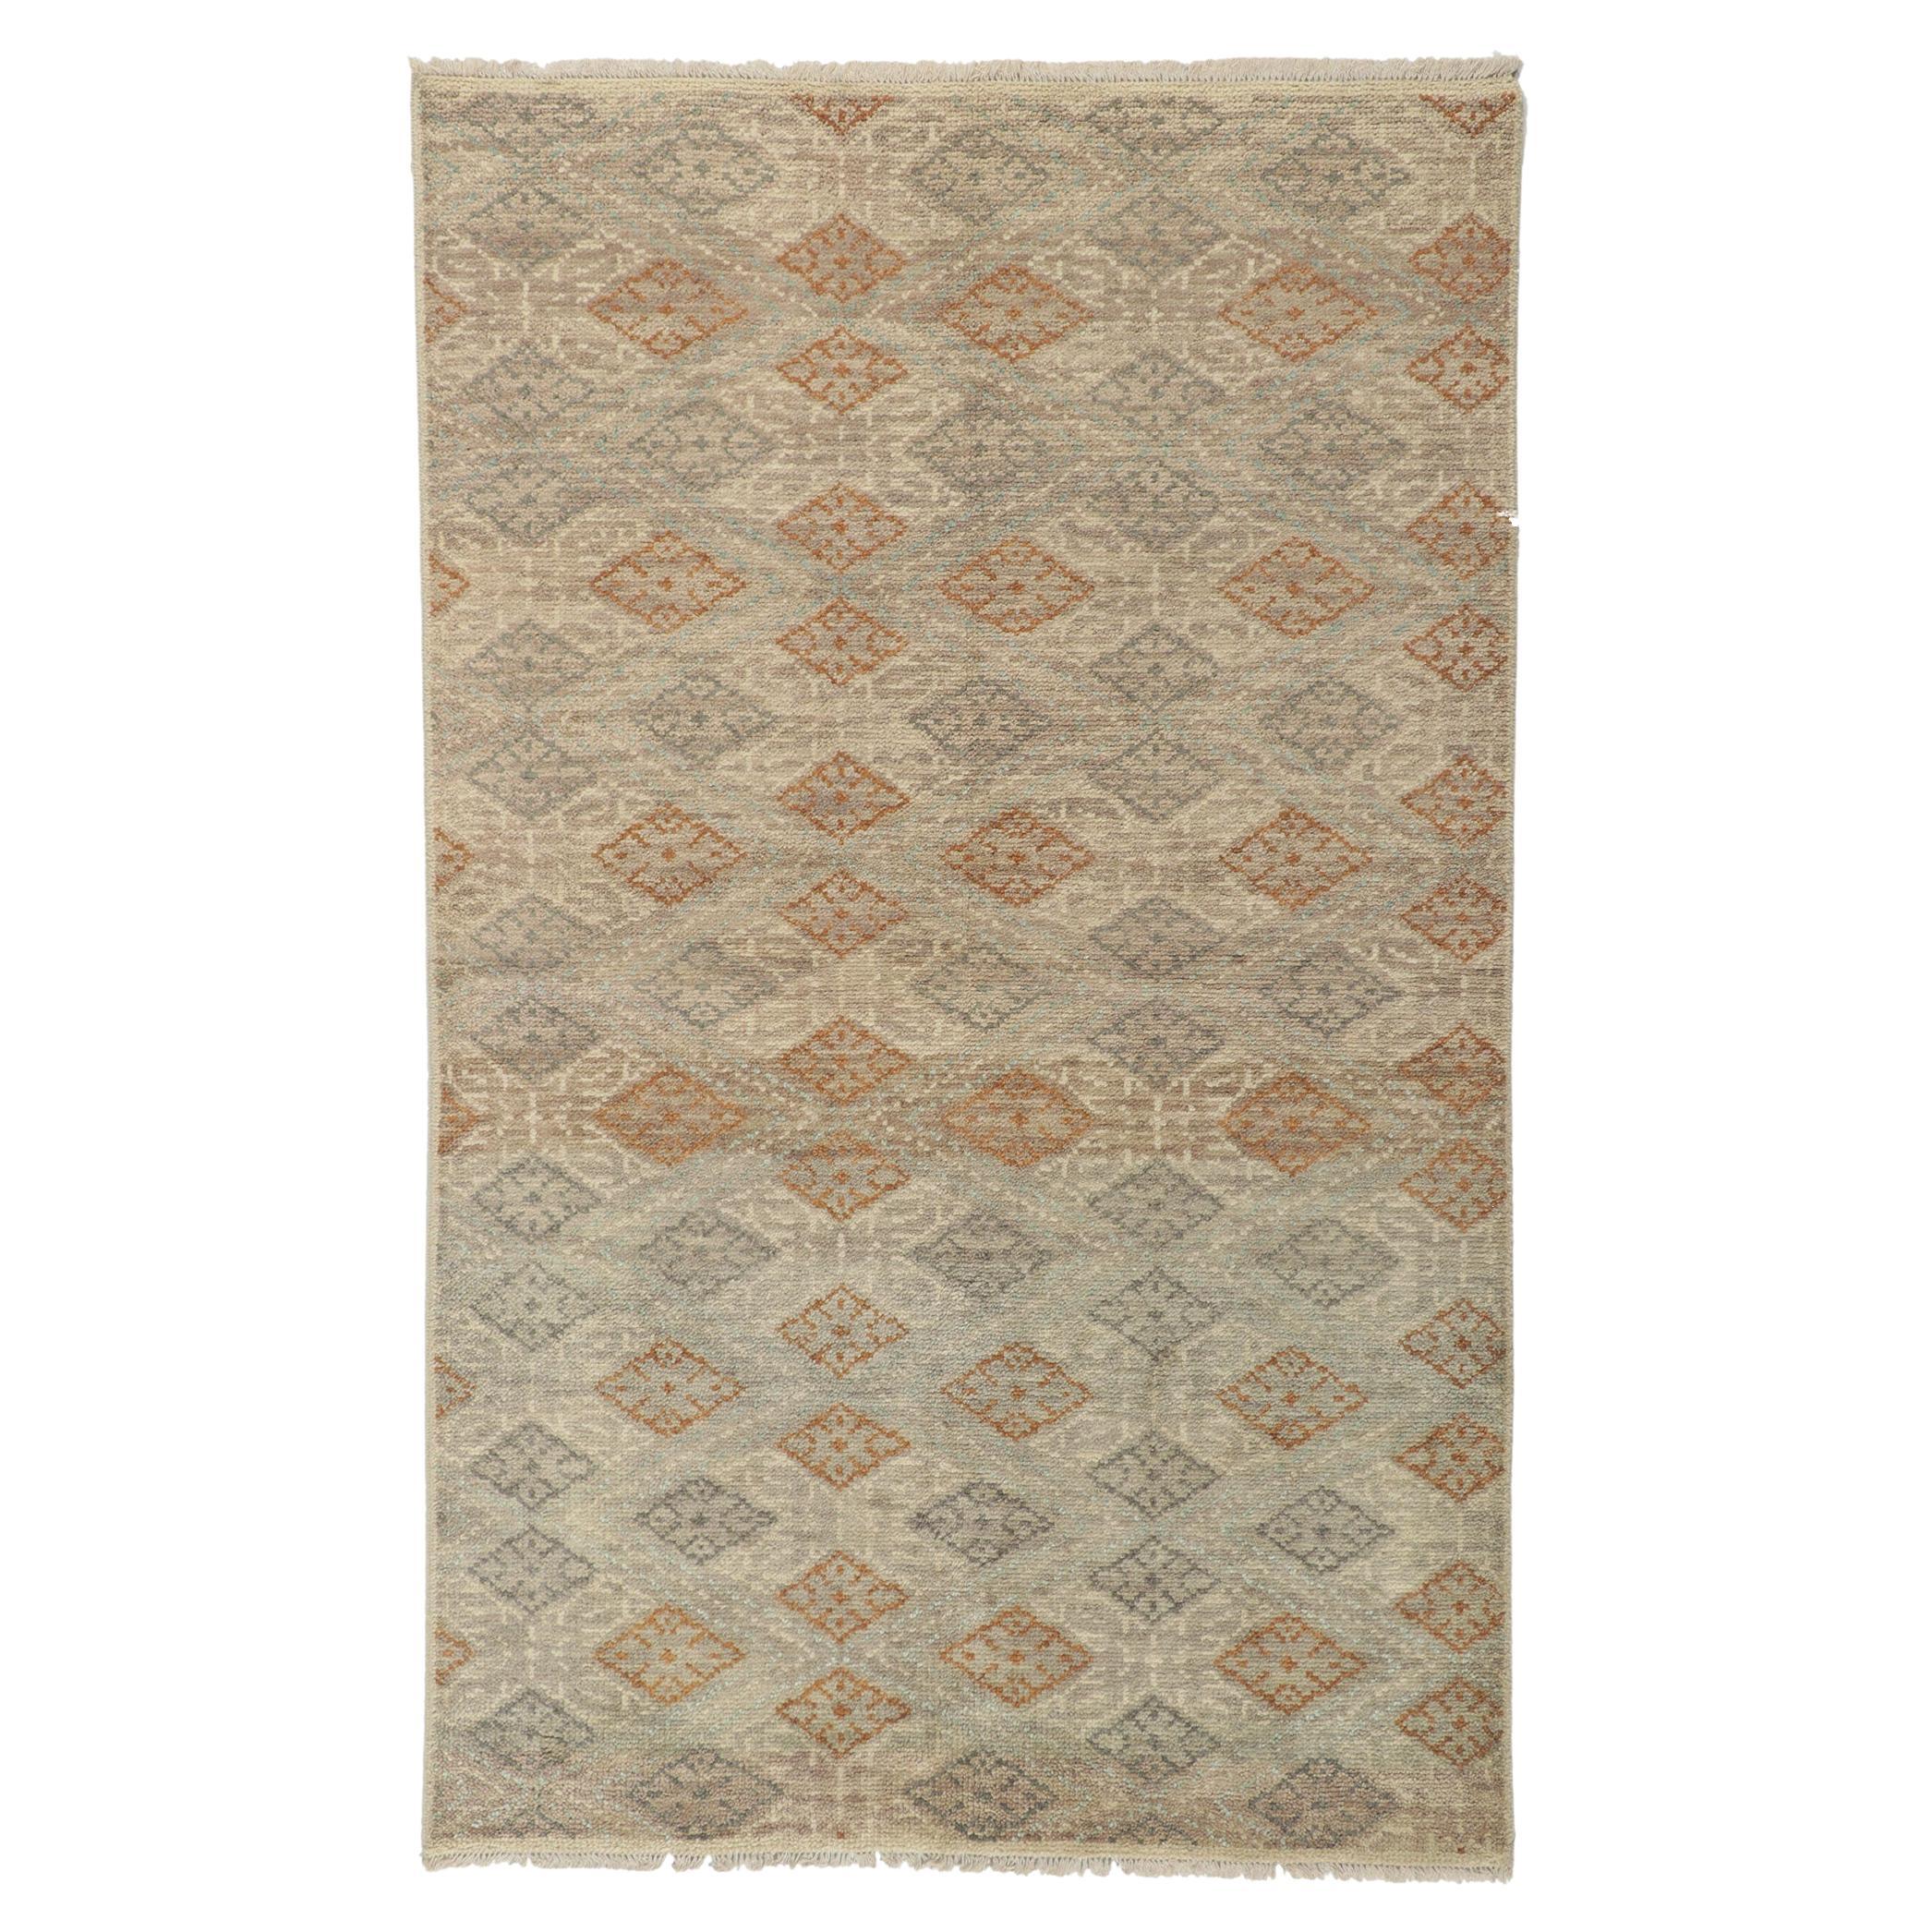 New Rustic Earth-Tone Transitional Area Rug with Modern Style